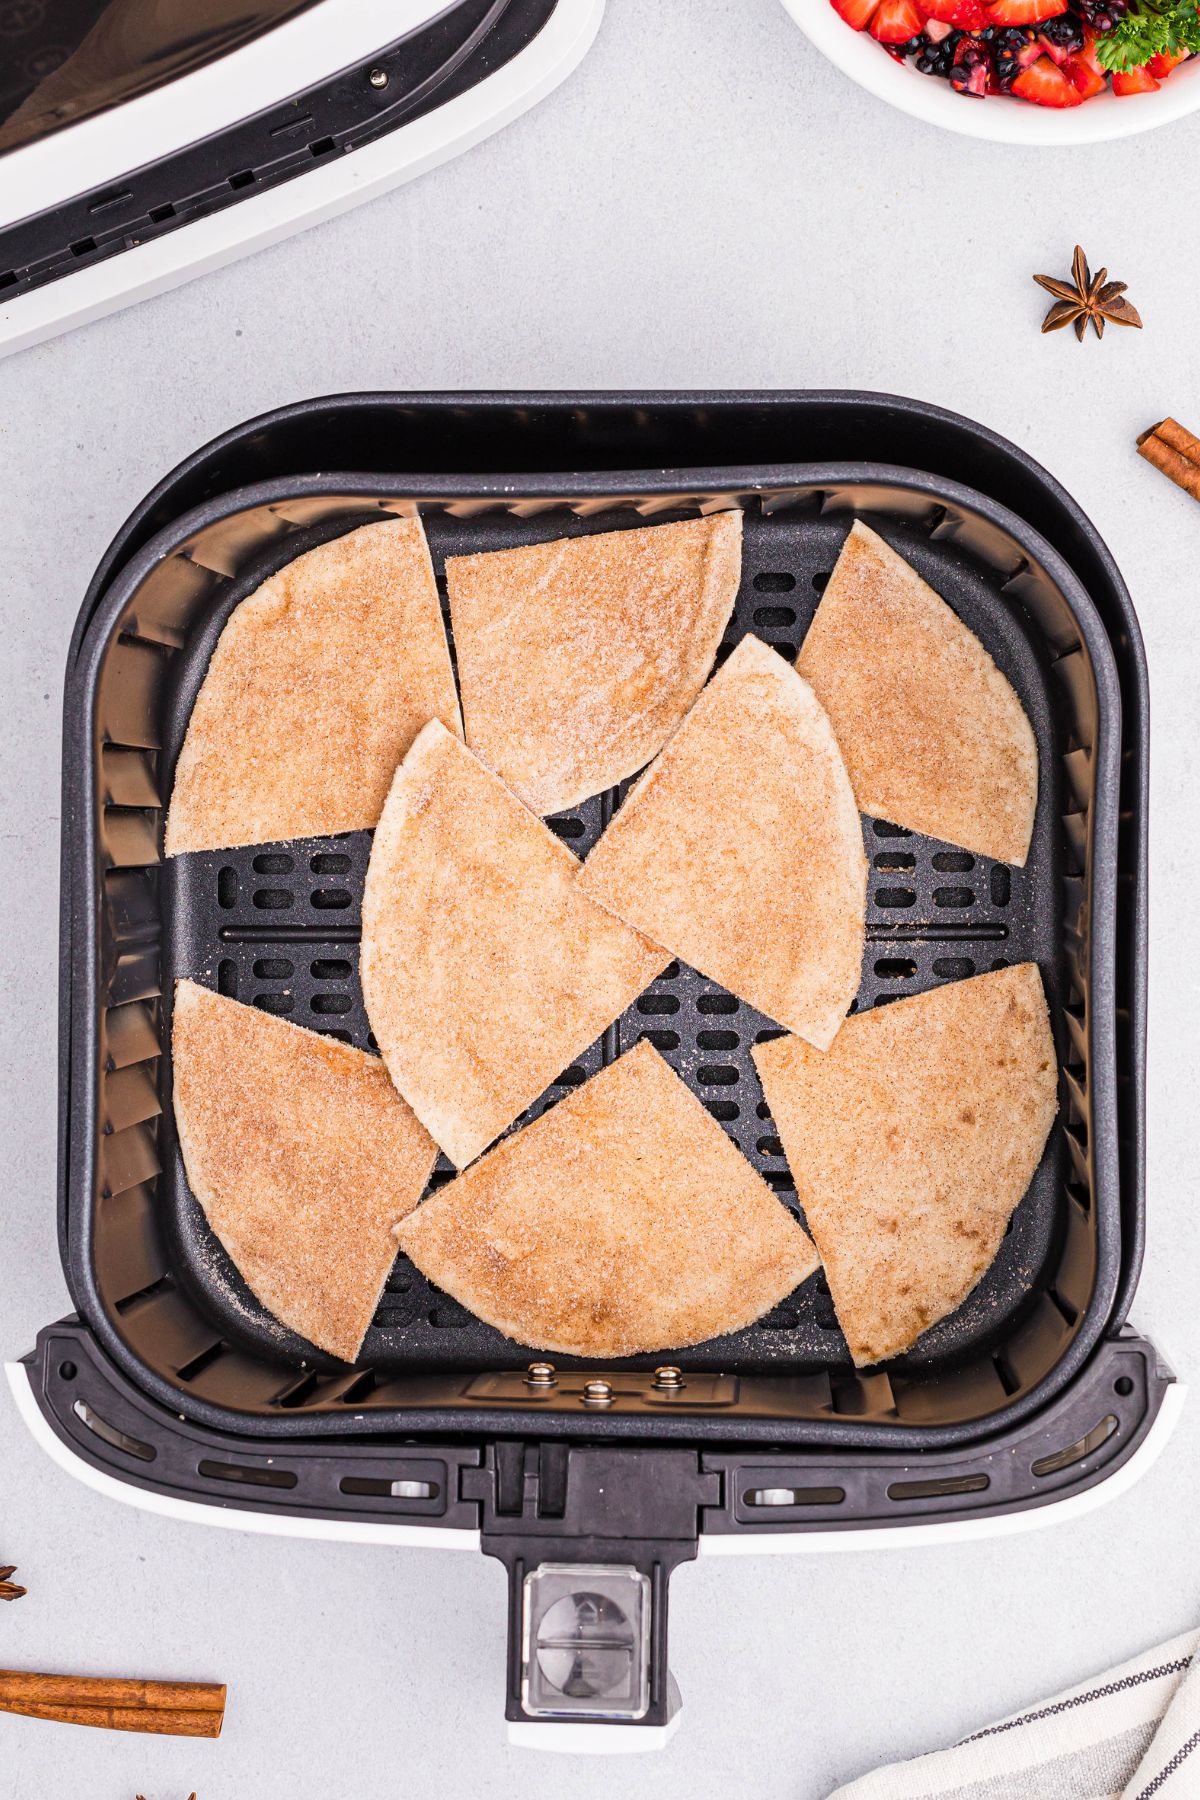 Flour tortilla coated in sugar and cinnamon cut into slices in the air fryer basket